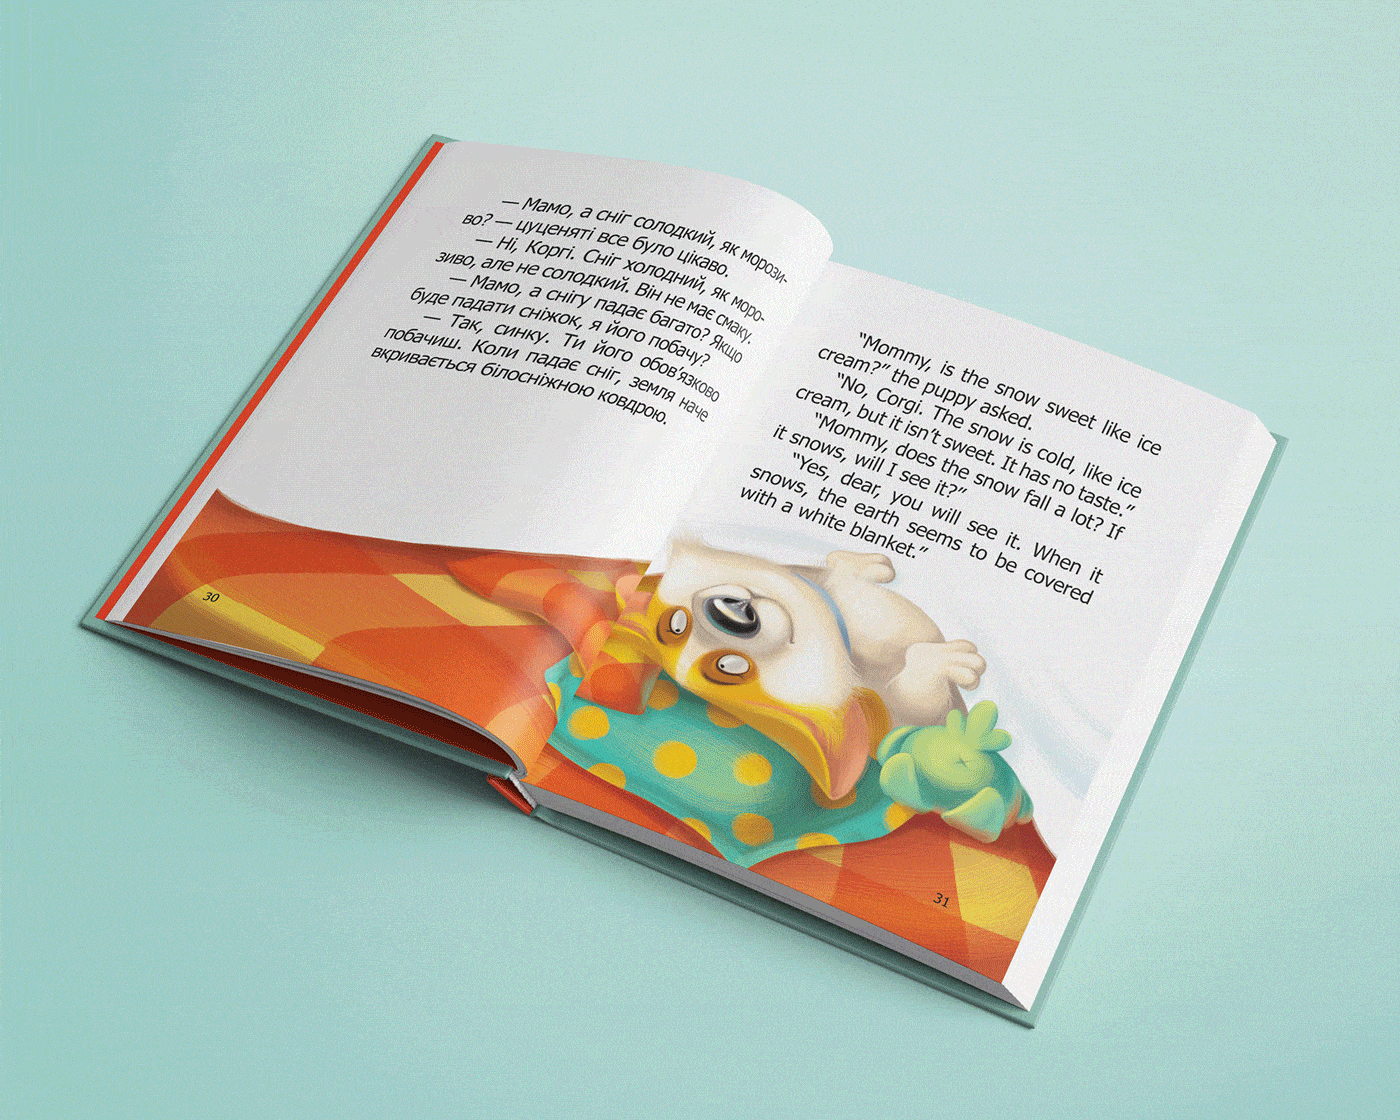 Illustrations from the children's Corgy story book